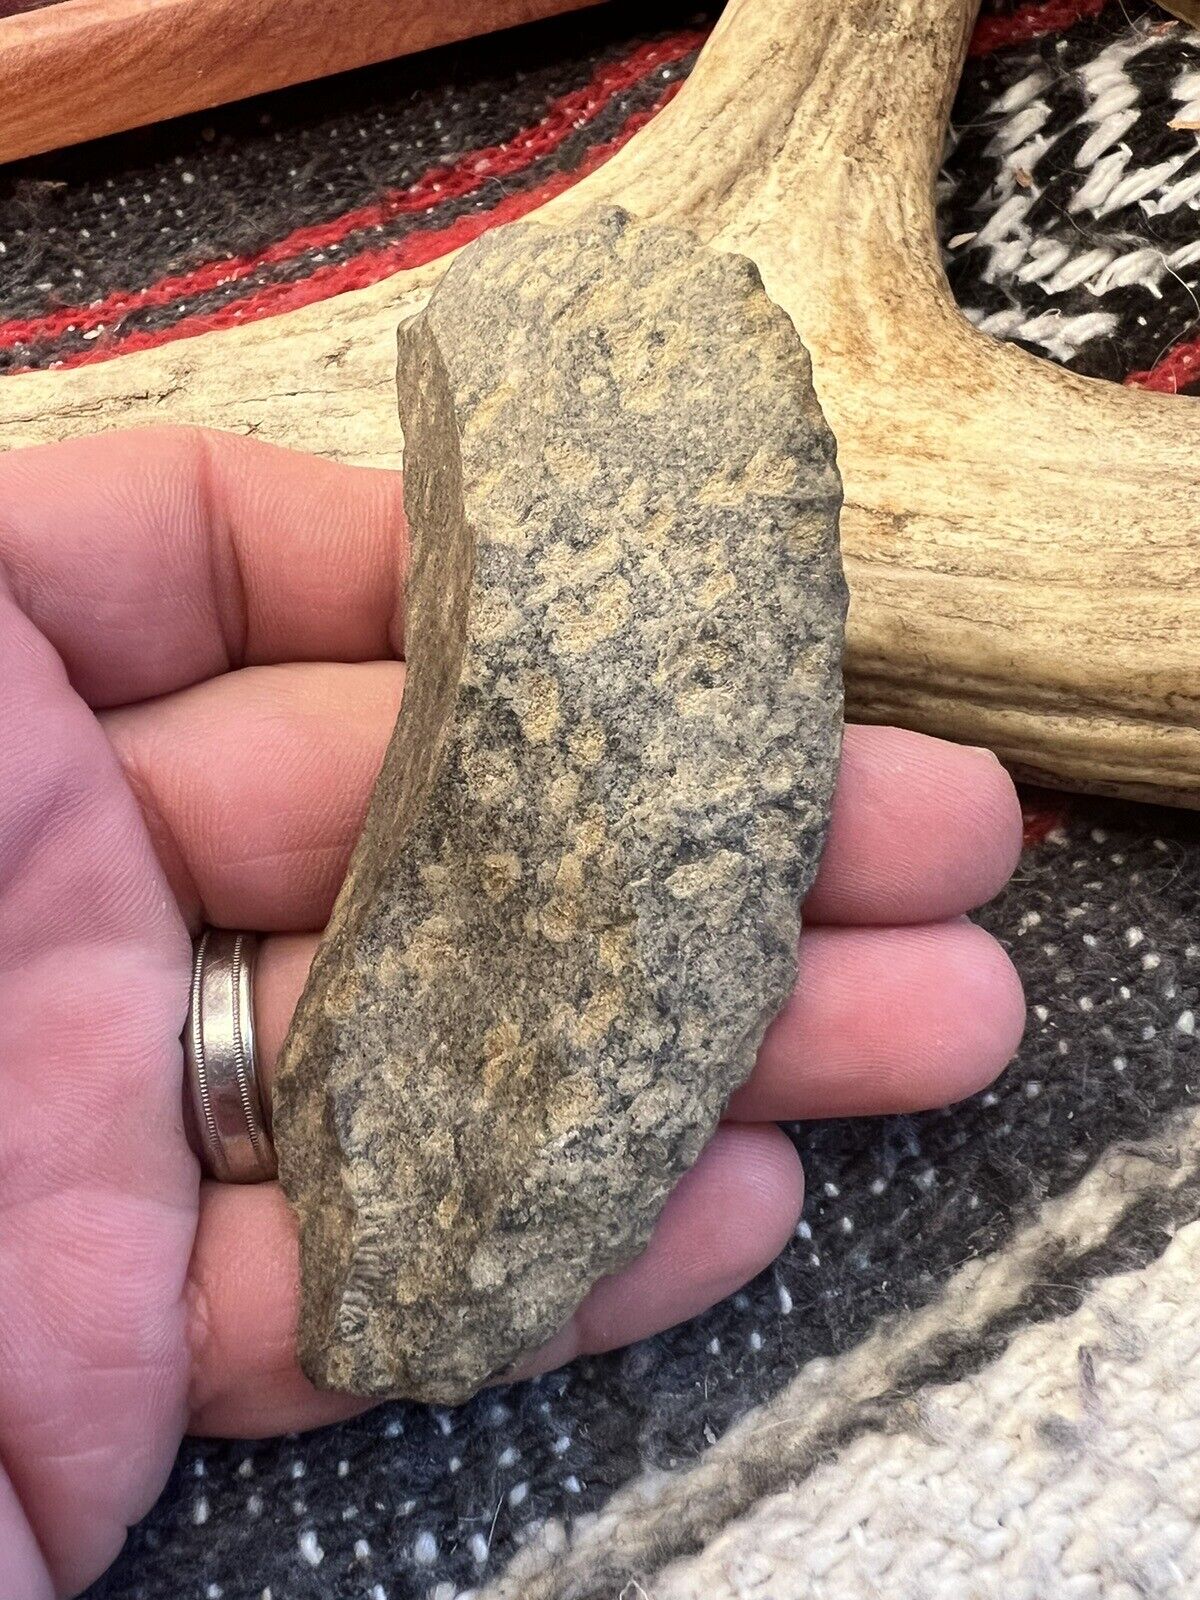 Large Archaic Period Flake Blade From Ashe County North Carolina. E58